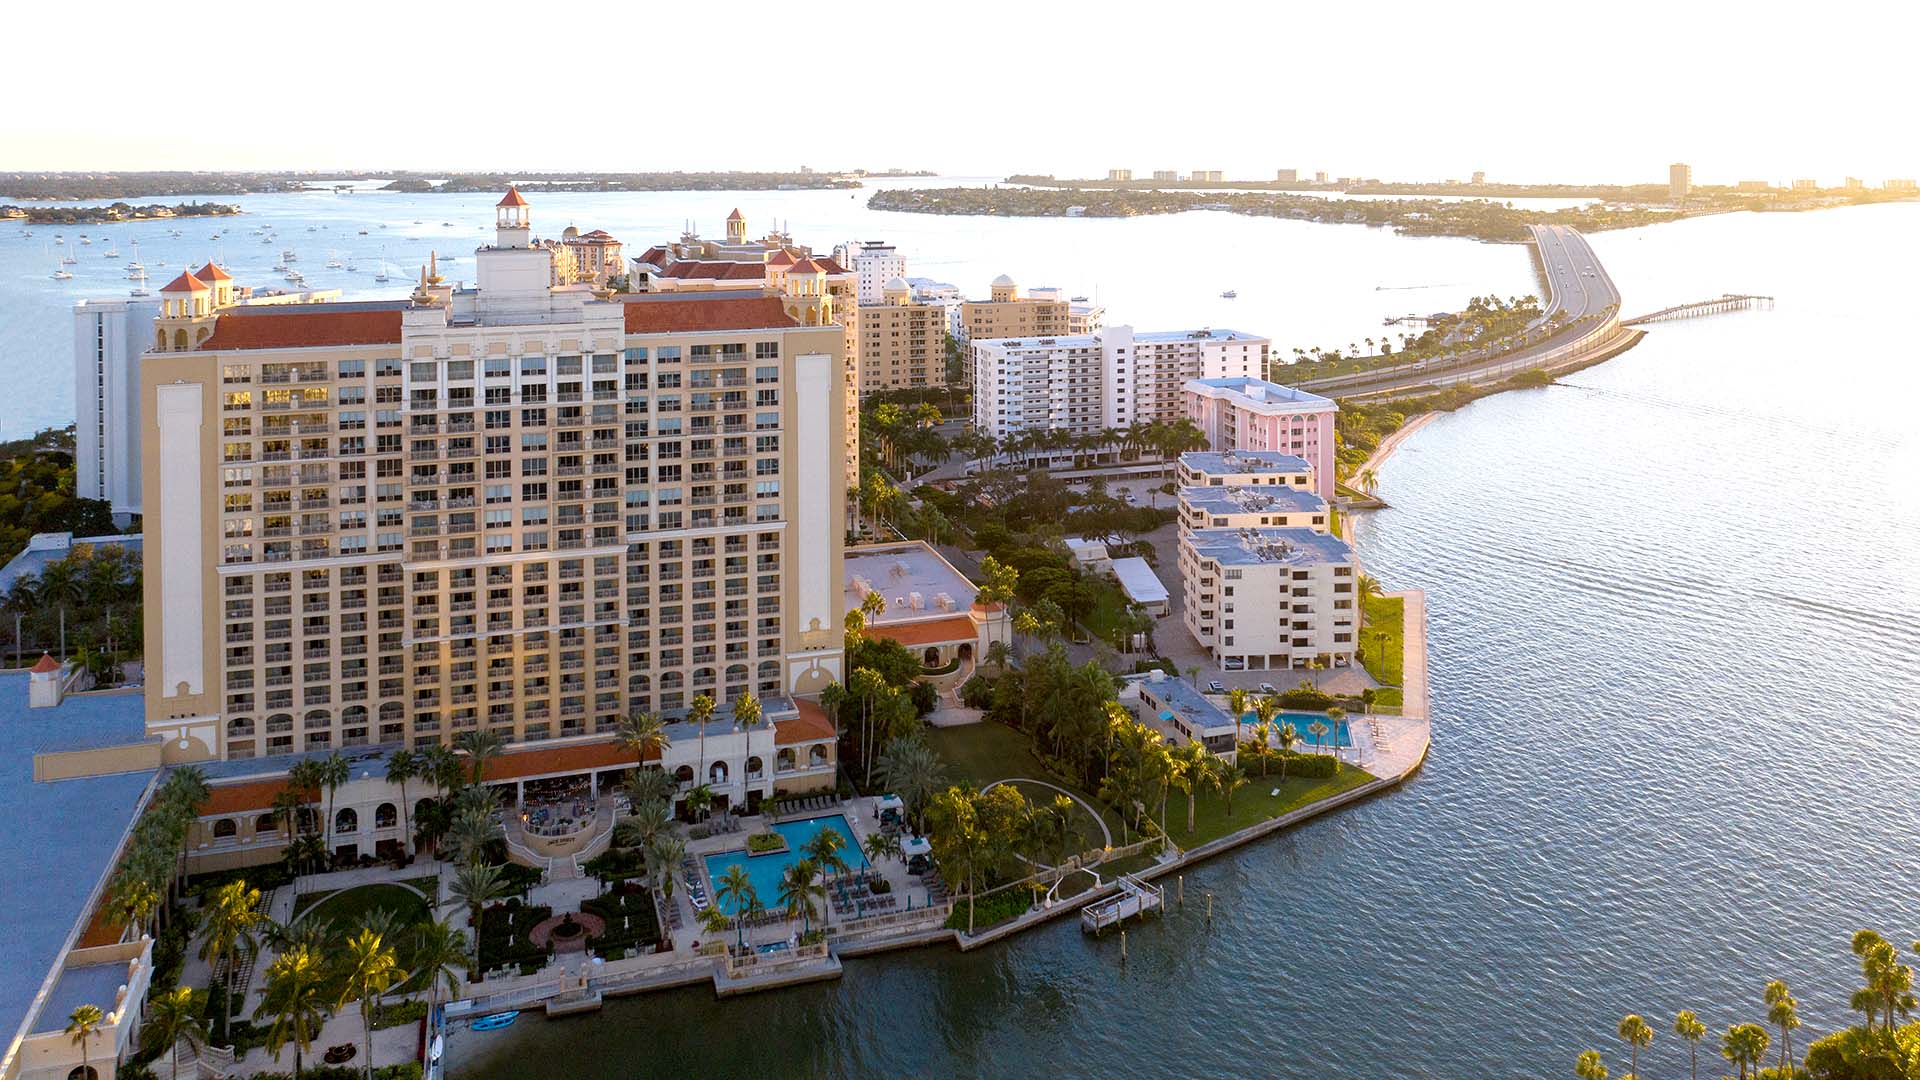 aerial view of The Ritz-Carlton, Sarasota and the surrounding water